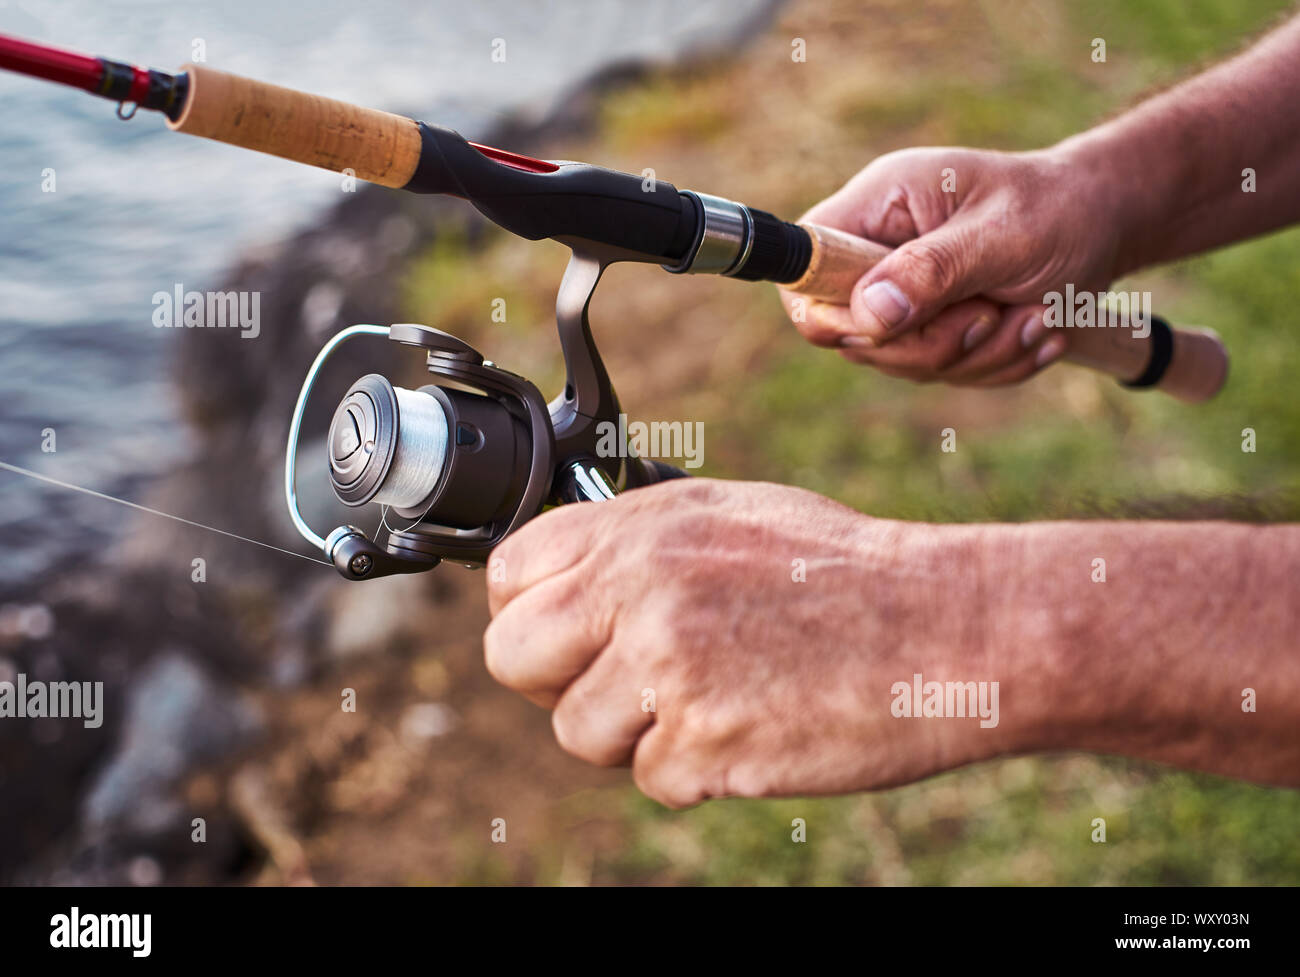 The hands of an adult man holding a sport fishing rod with reel